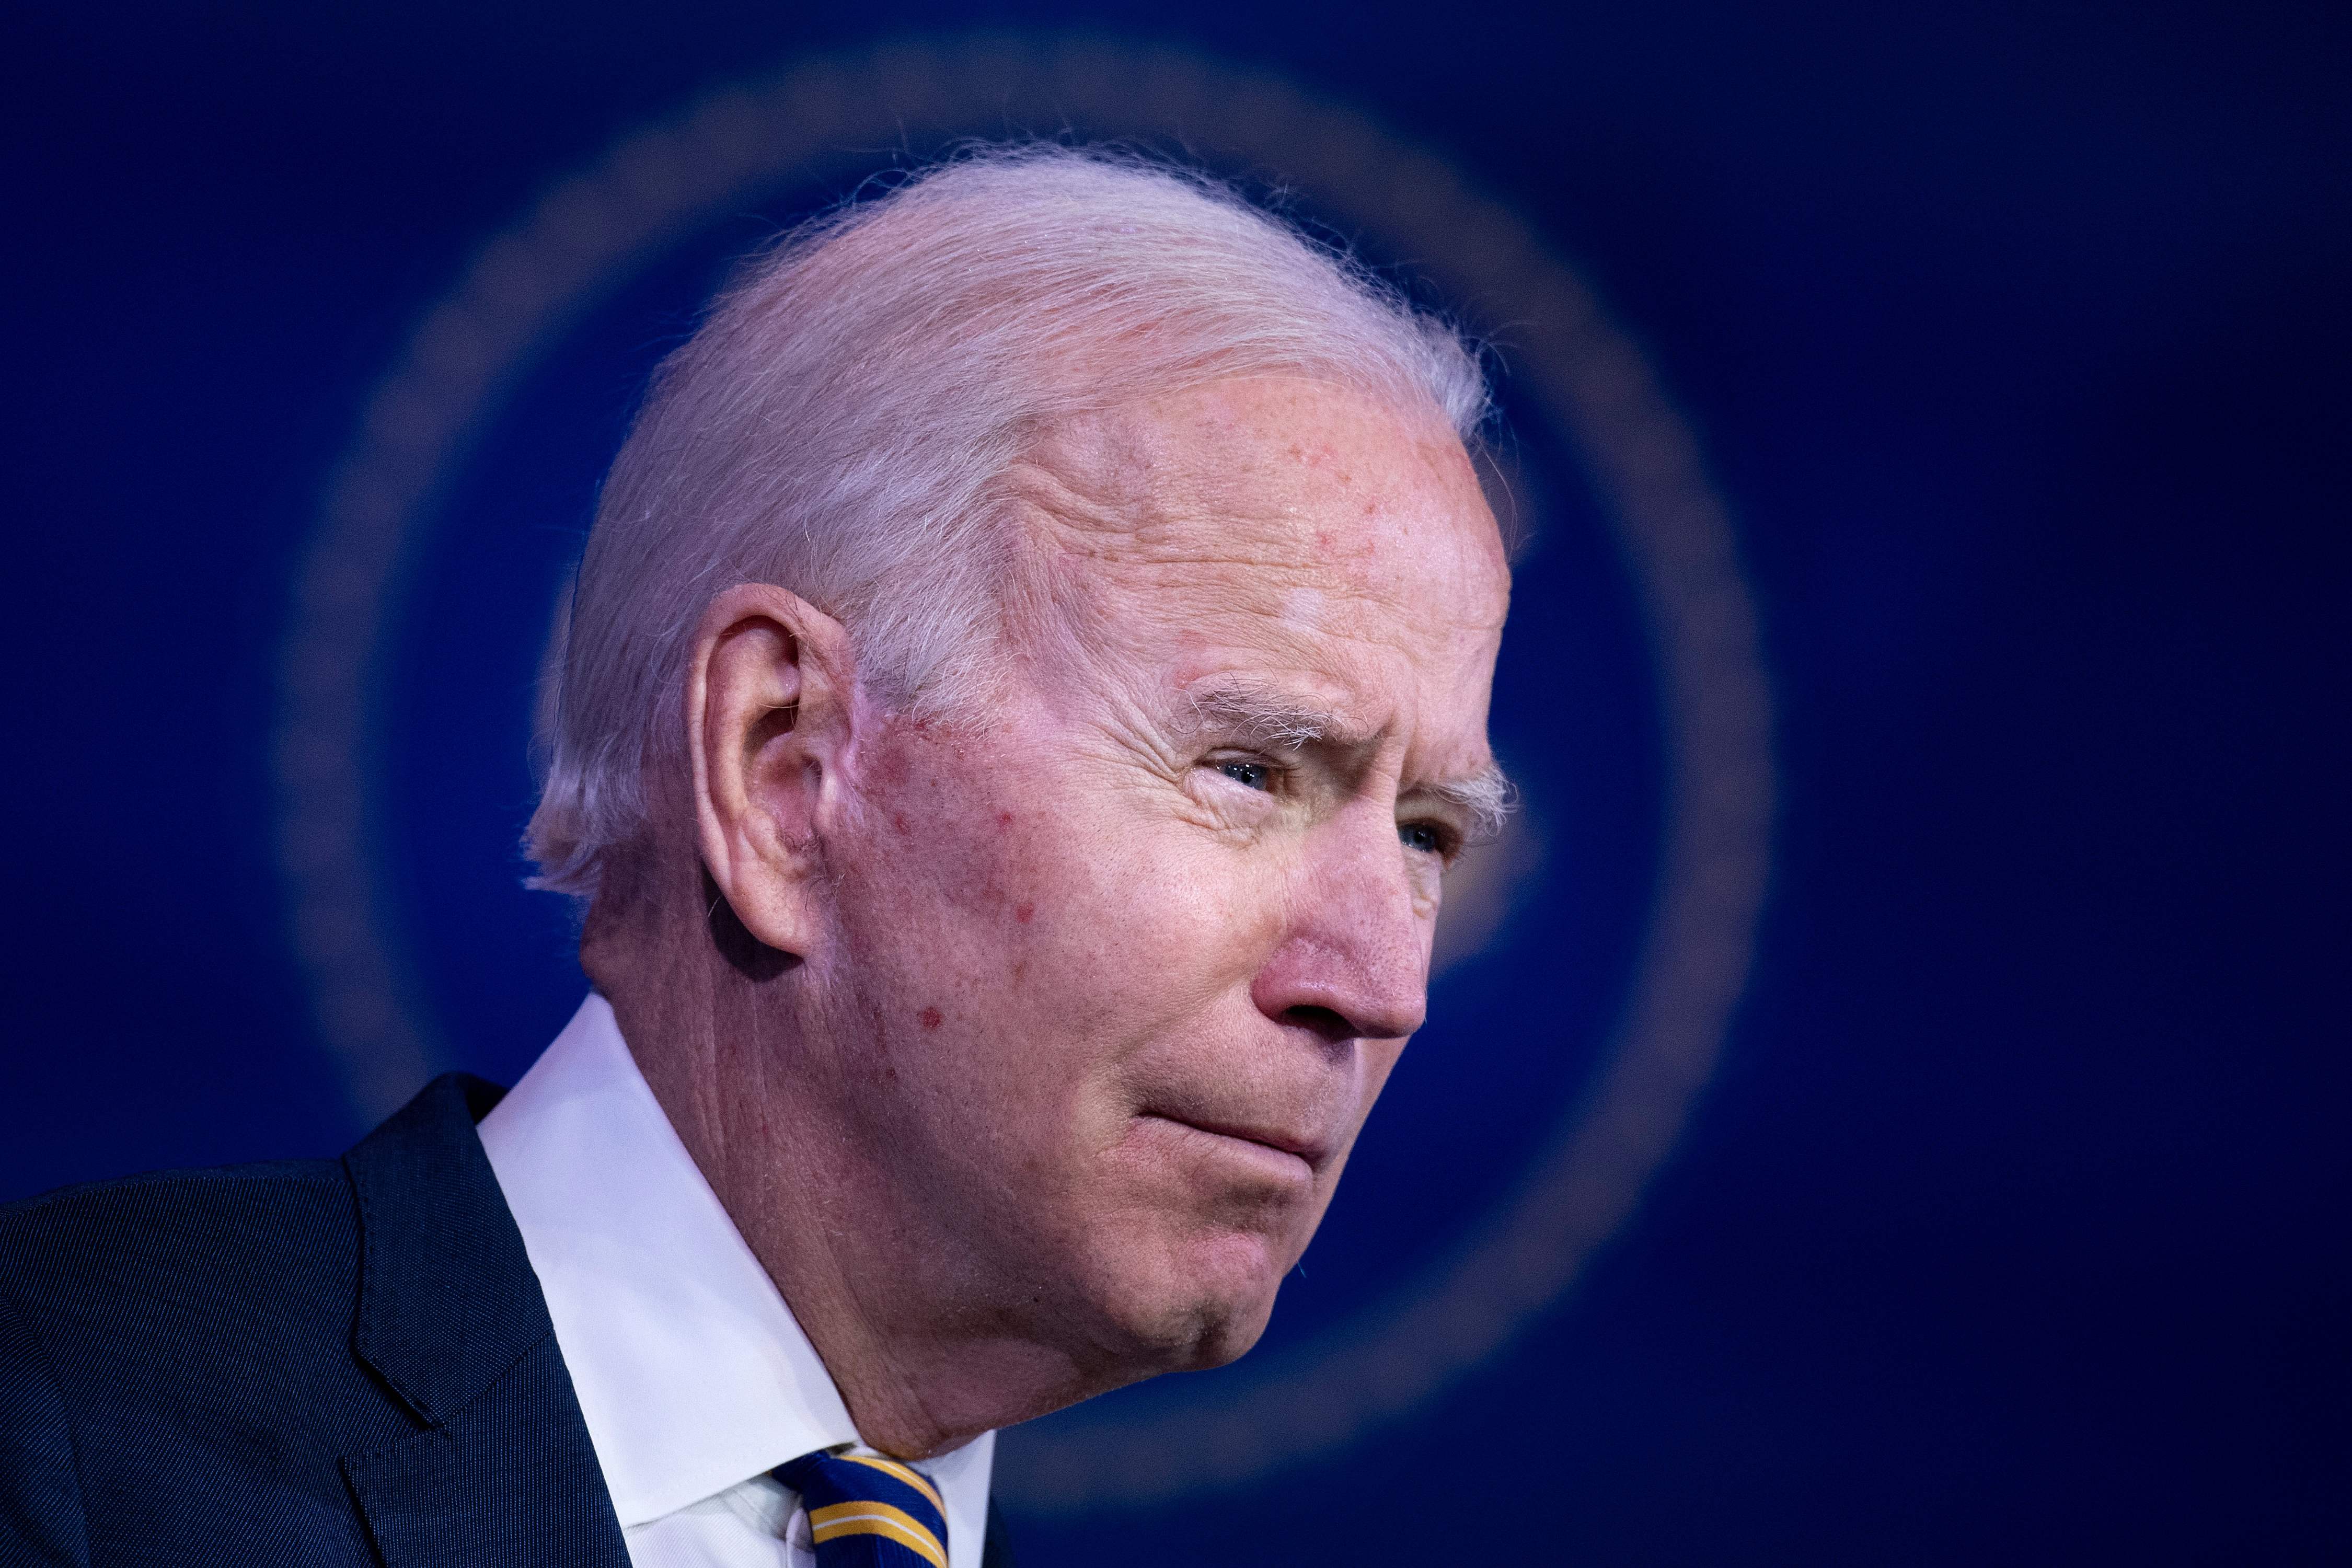 As an old hand and senatorial dealmaker himself, Joe Biden well understands the limits of presidential power and the art of the possible